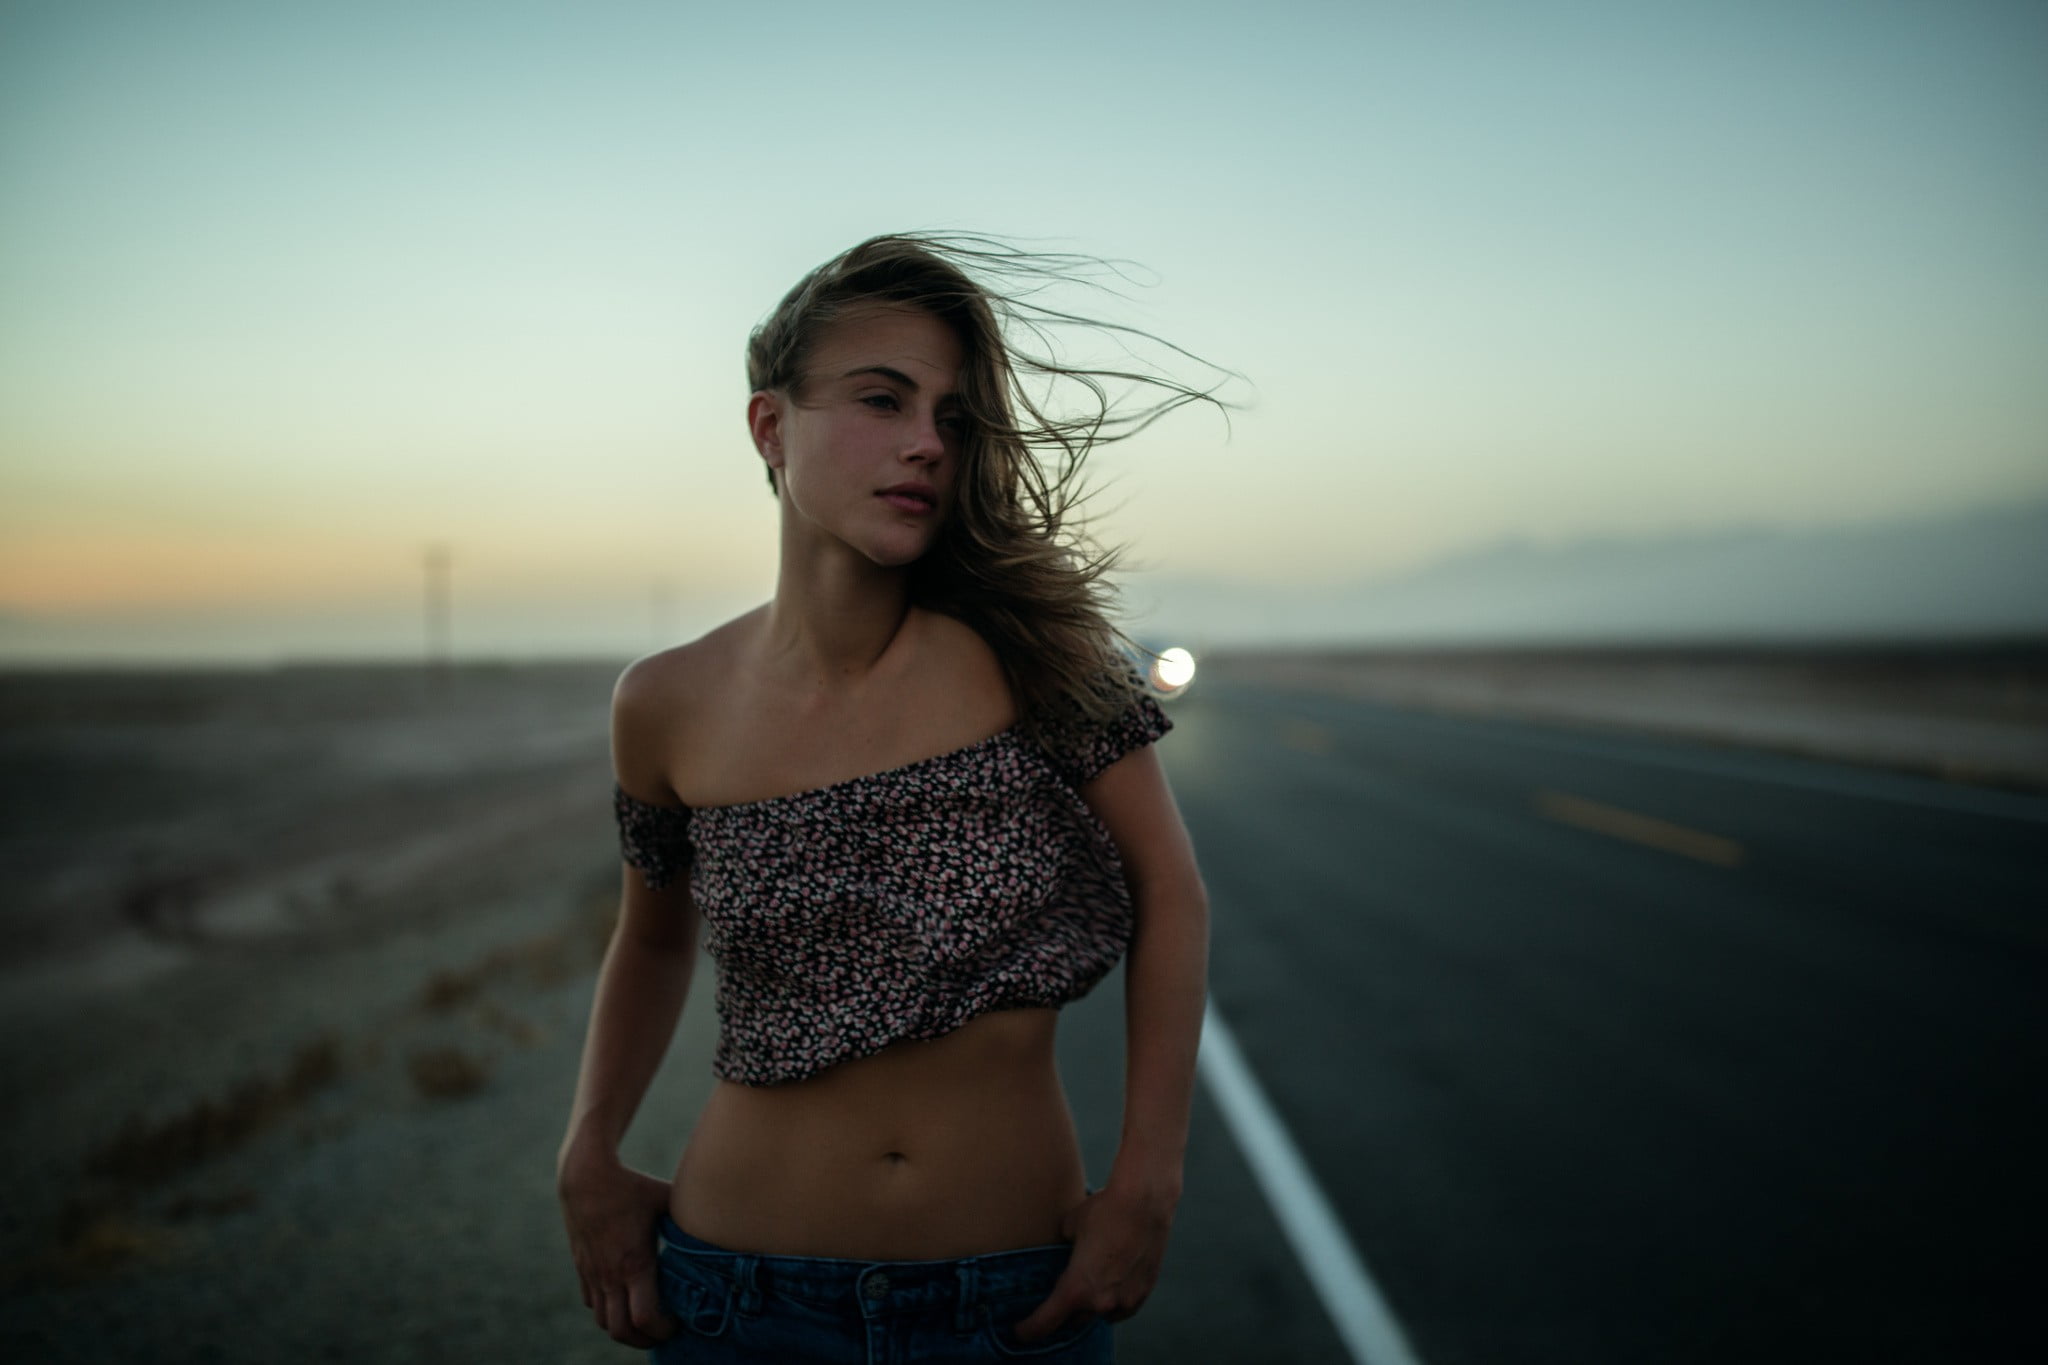 woman wearing crop top standing in middle of road during daytime